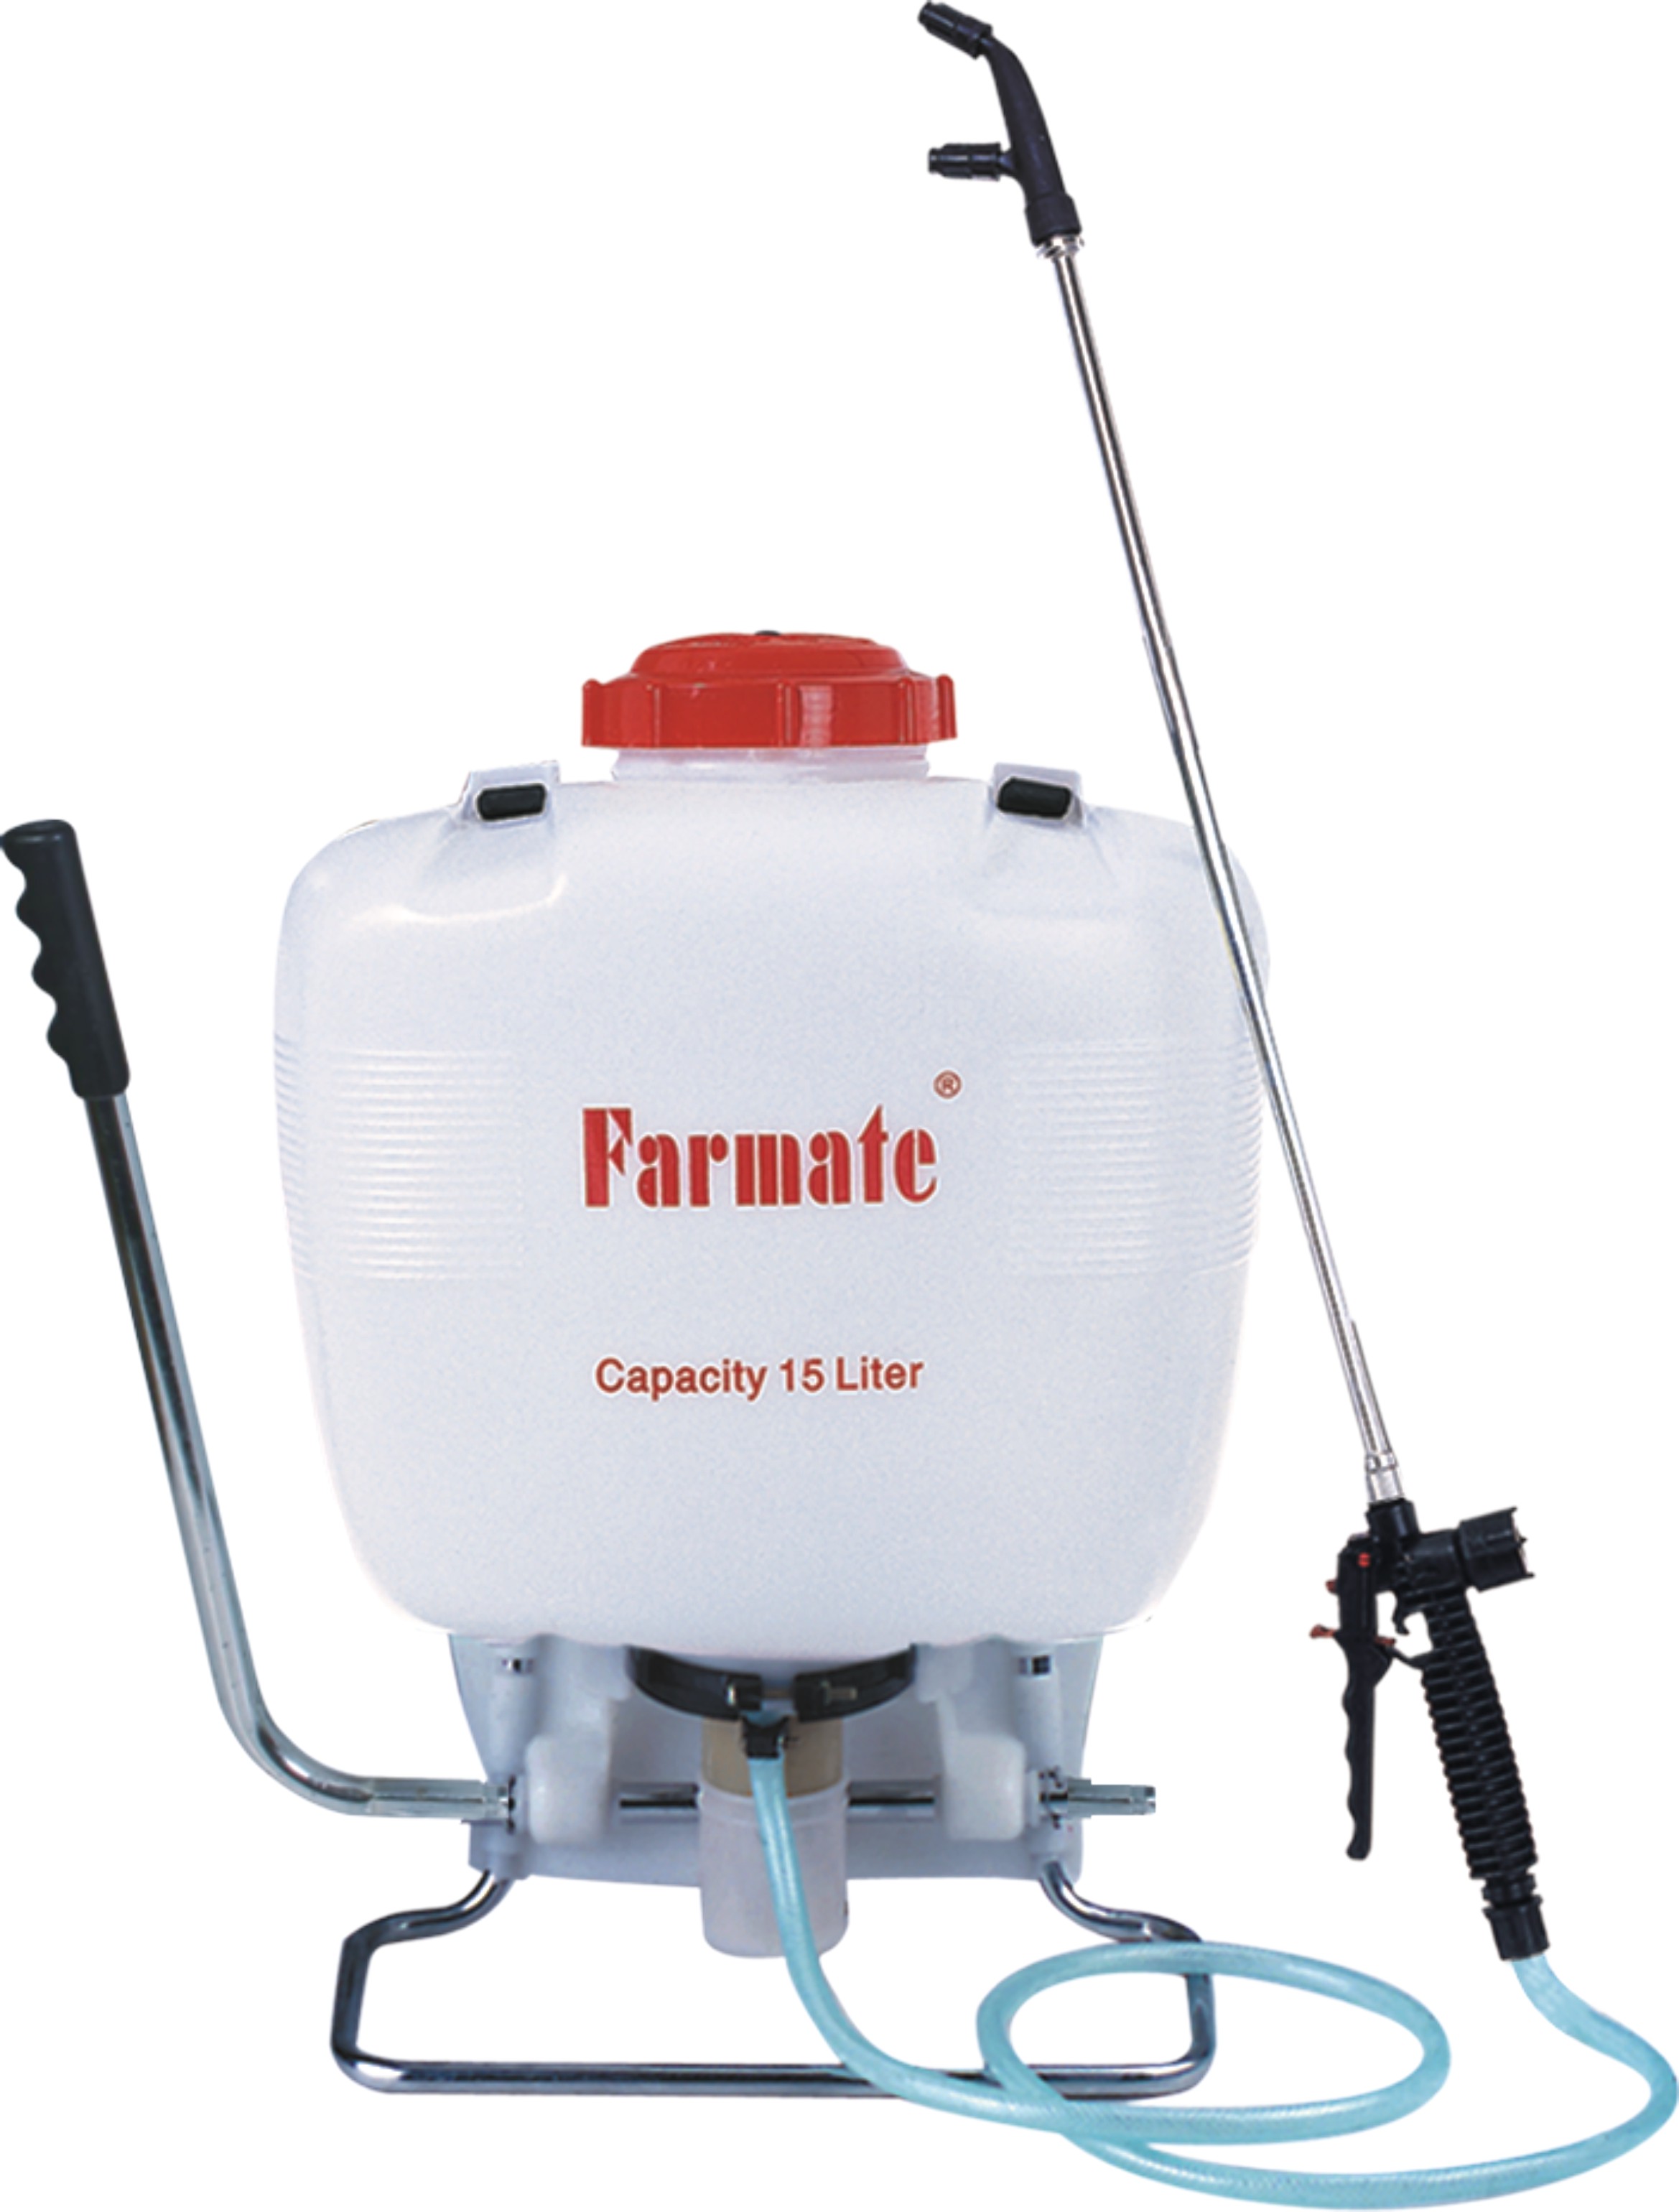 Pressurized Hand Sprayer For Pesticides With Long Wand